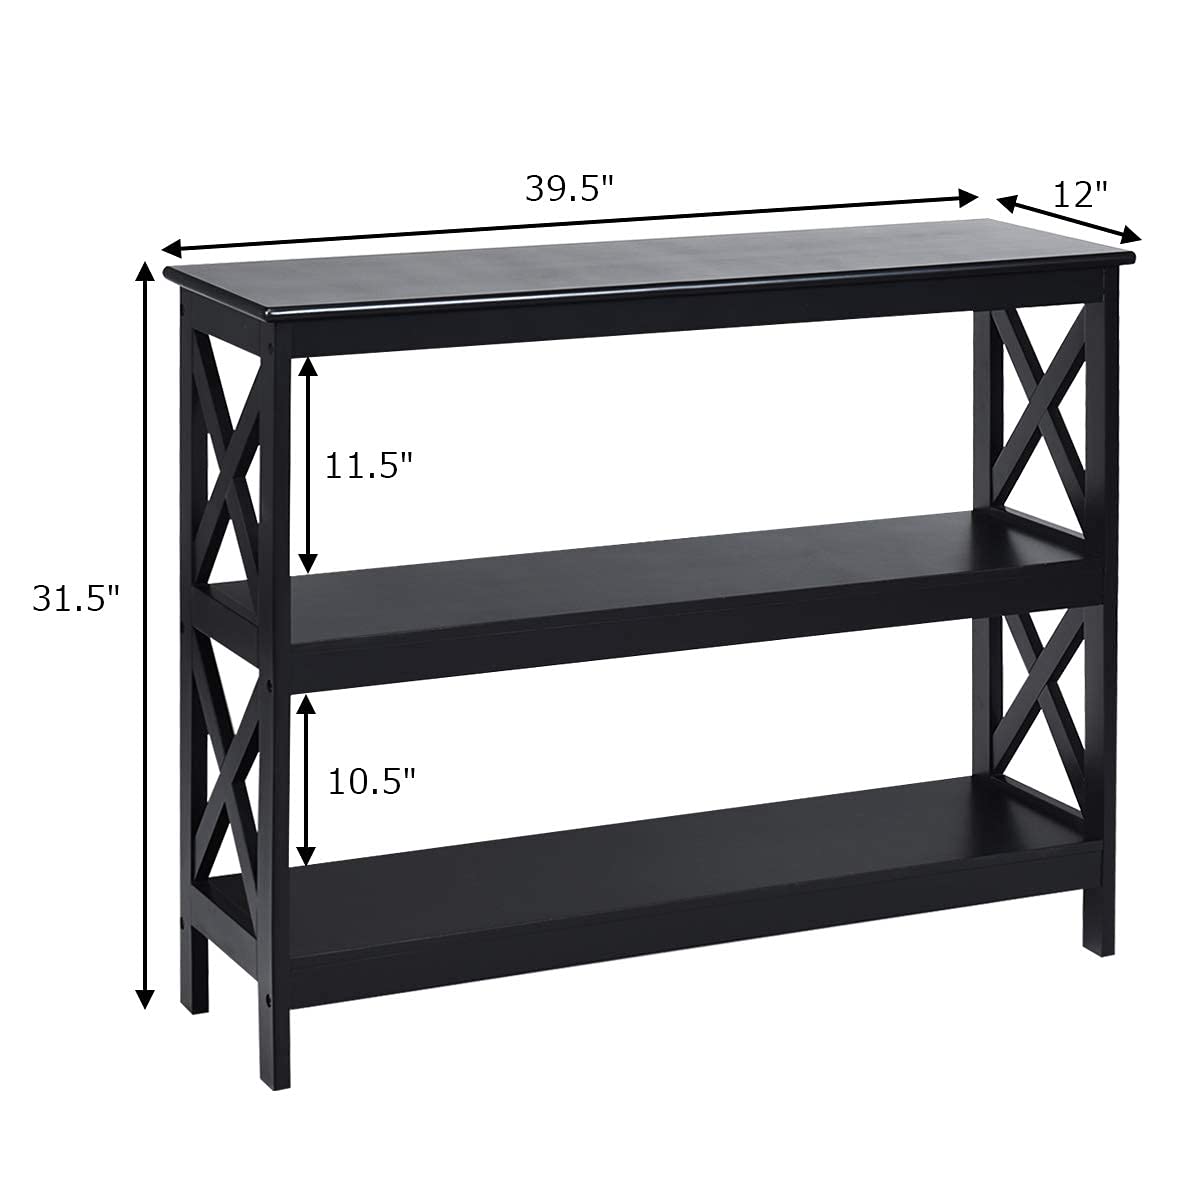 Giantex Console Table with Storage Shelves and X-Shape-Design Bookshelf Narrow Accent Table